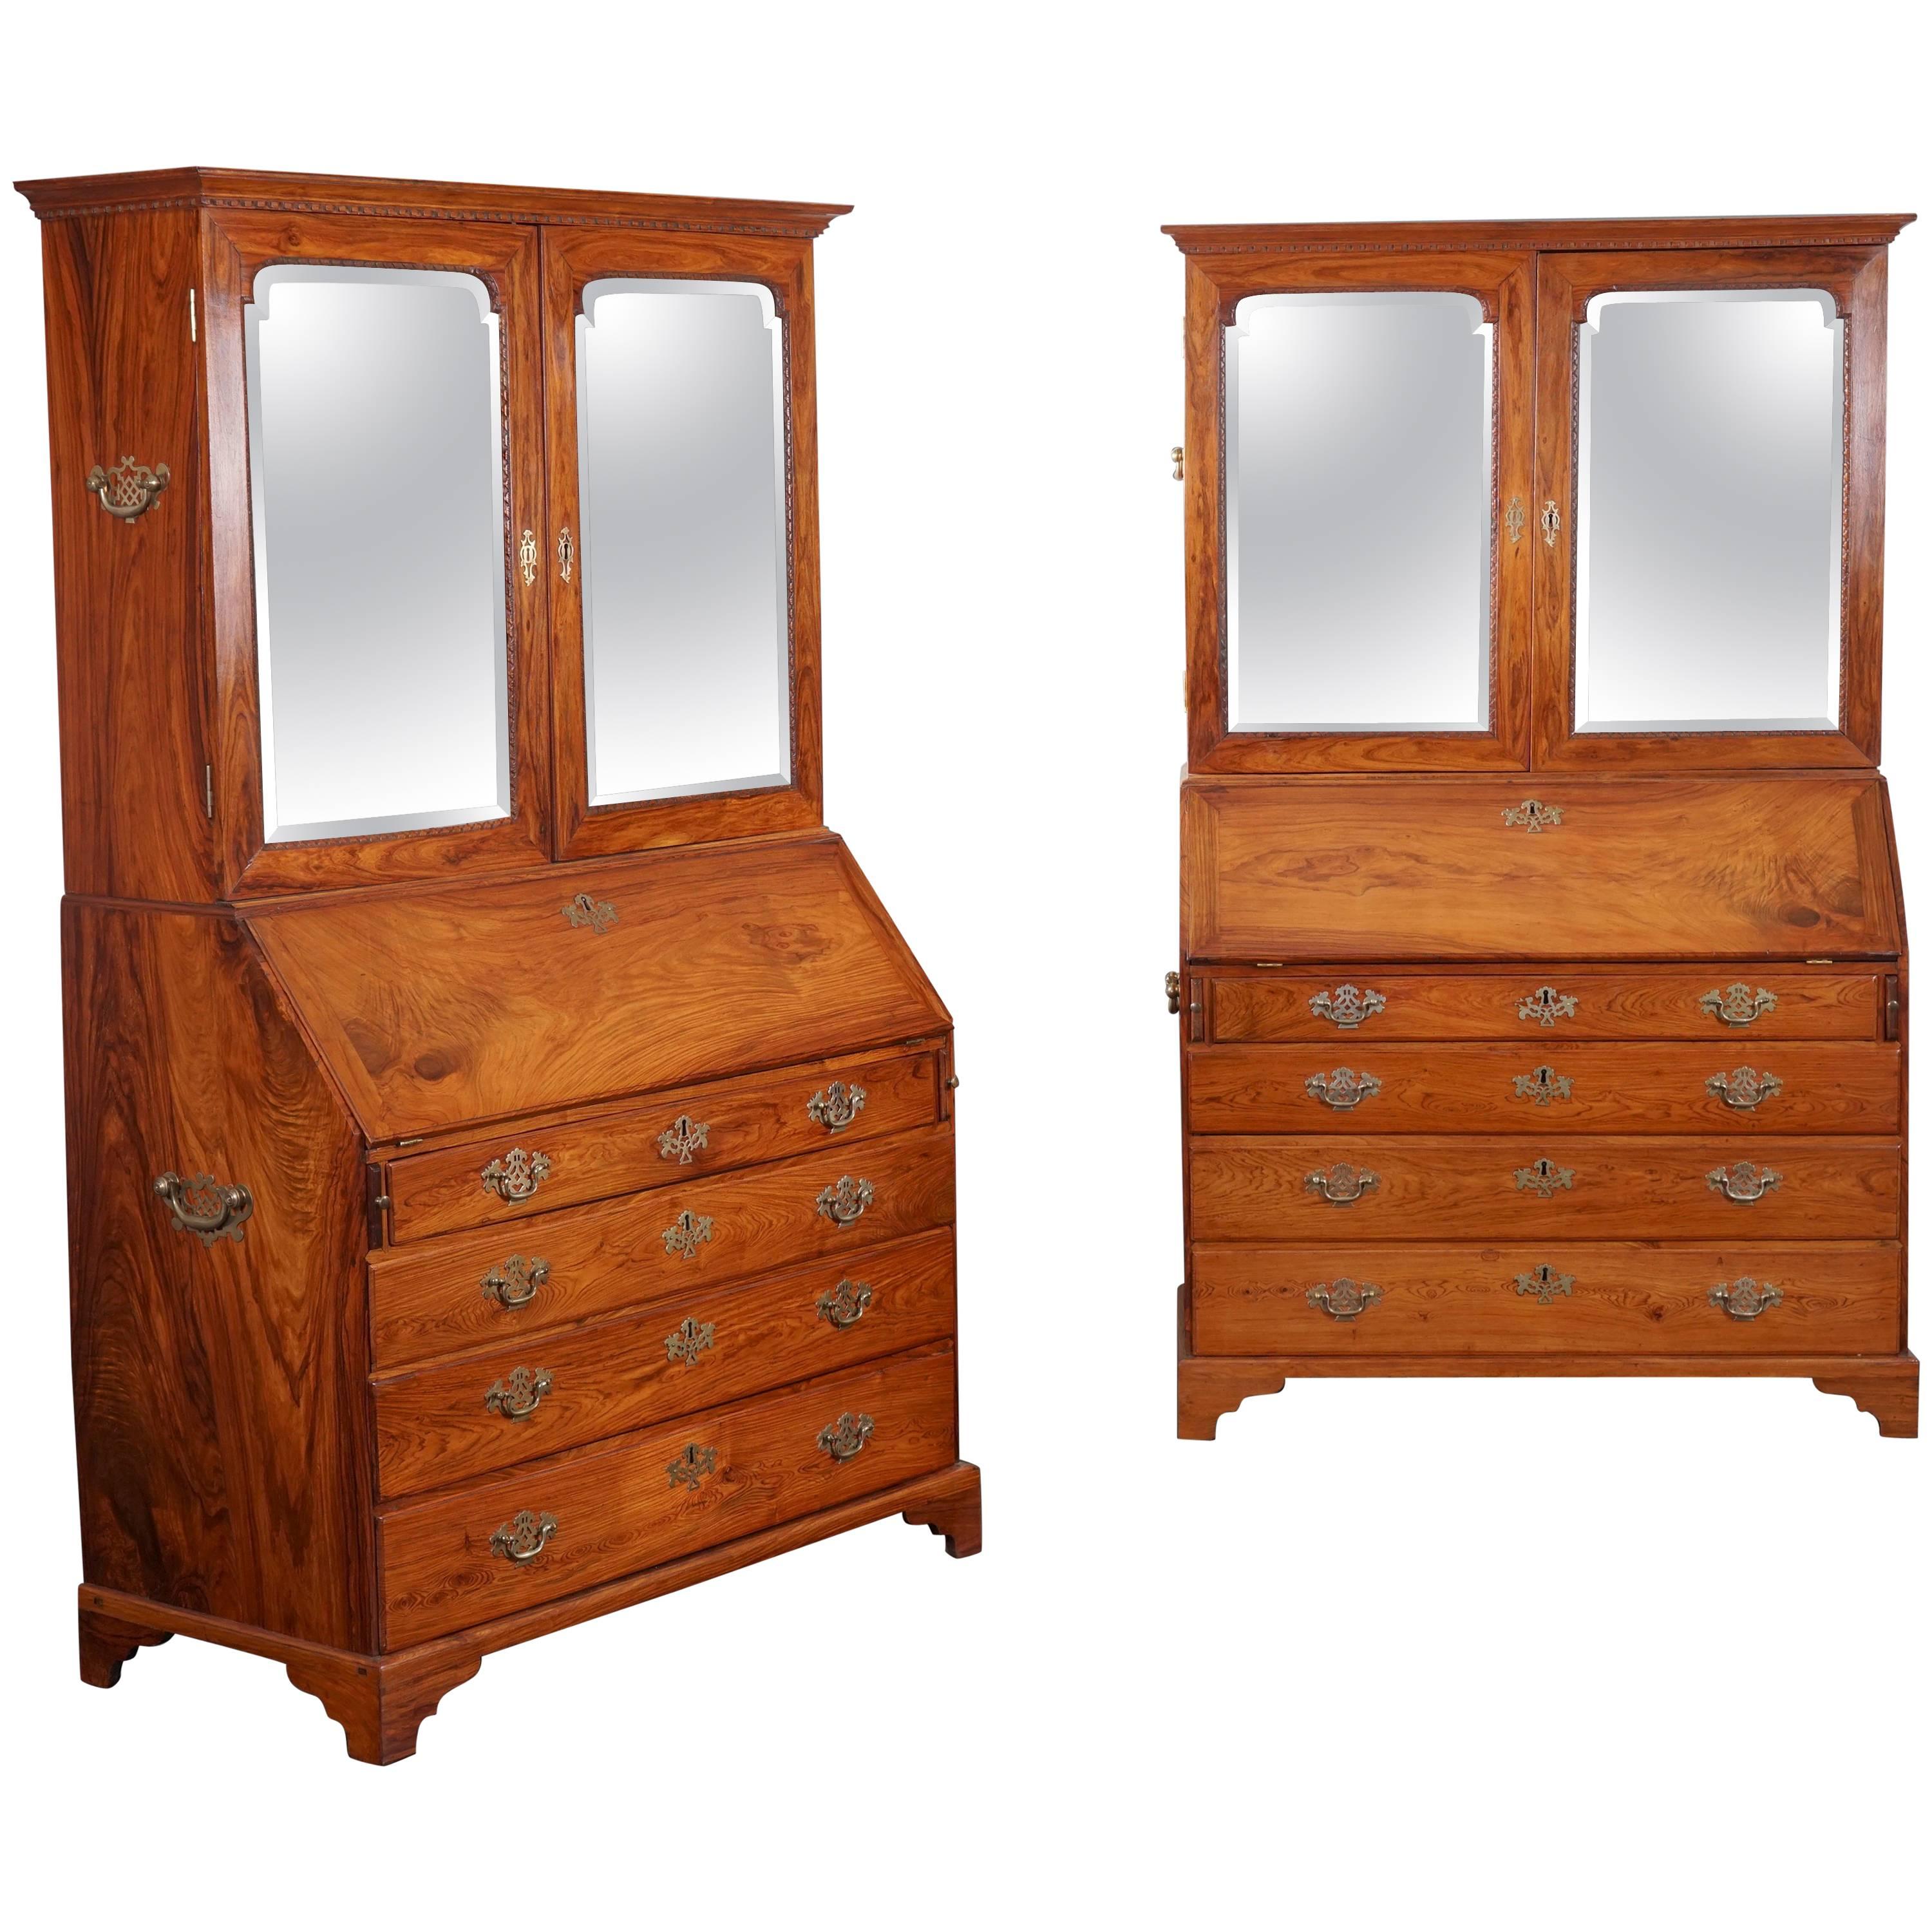 Unique Pair of Chinese Qianlong Period Huanghuali Bureau Cabinets, circa 1750 For Sale